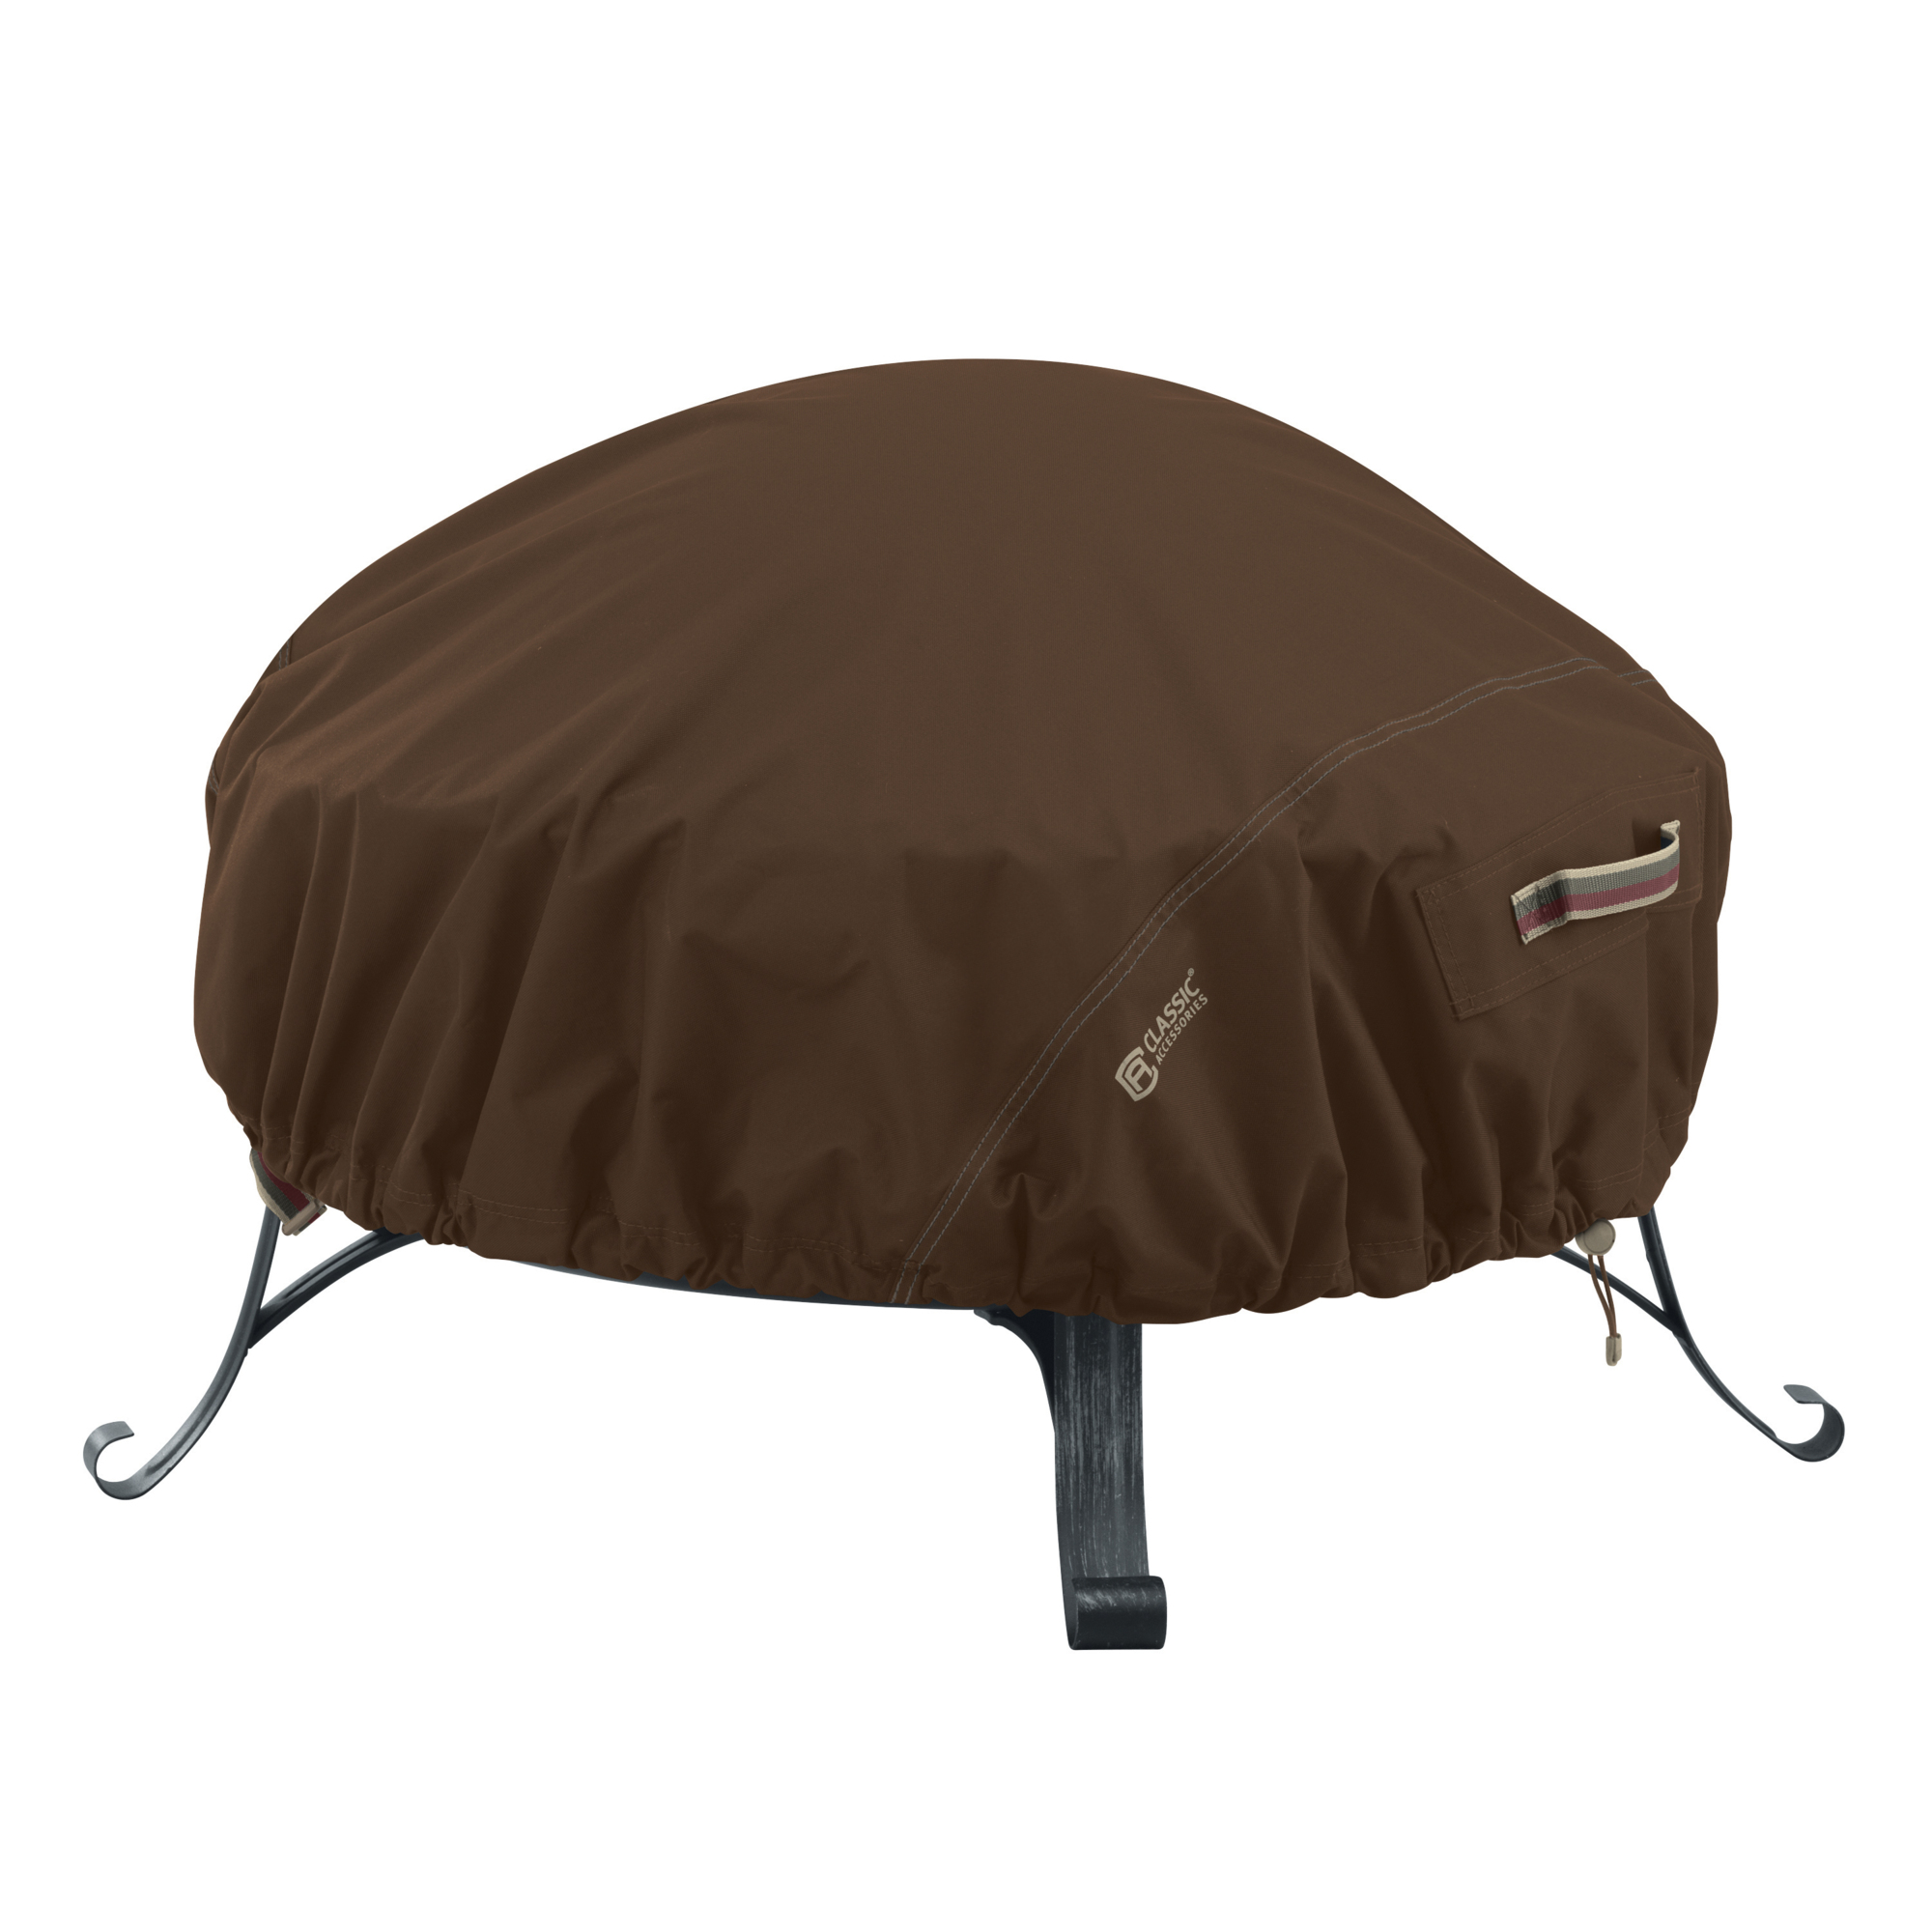 Classic Accessories Madrona, Round Fire Pit Cover L, Model 55-834-056601-RT